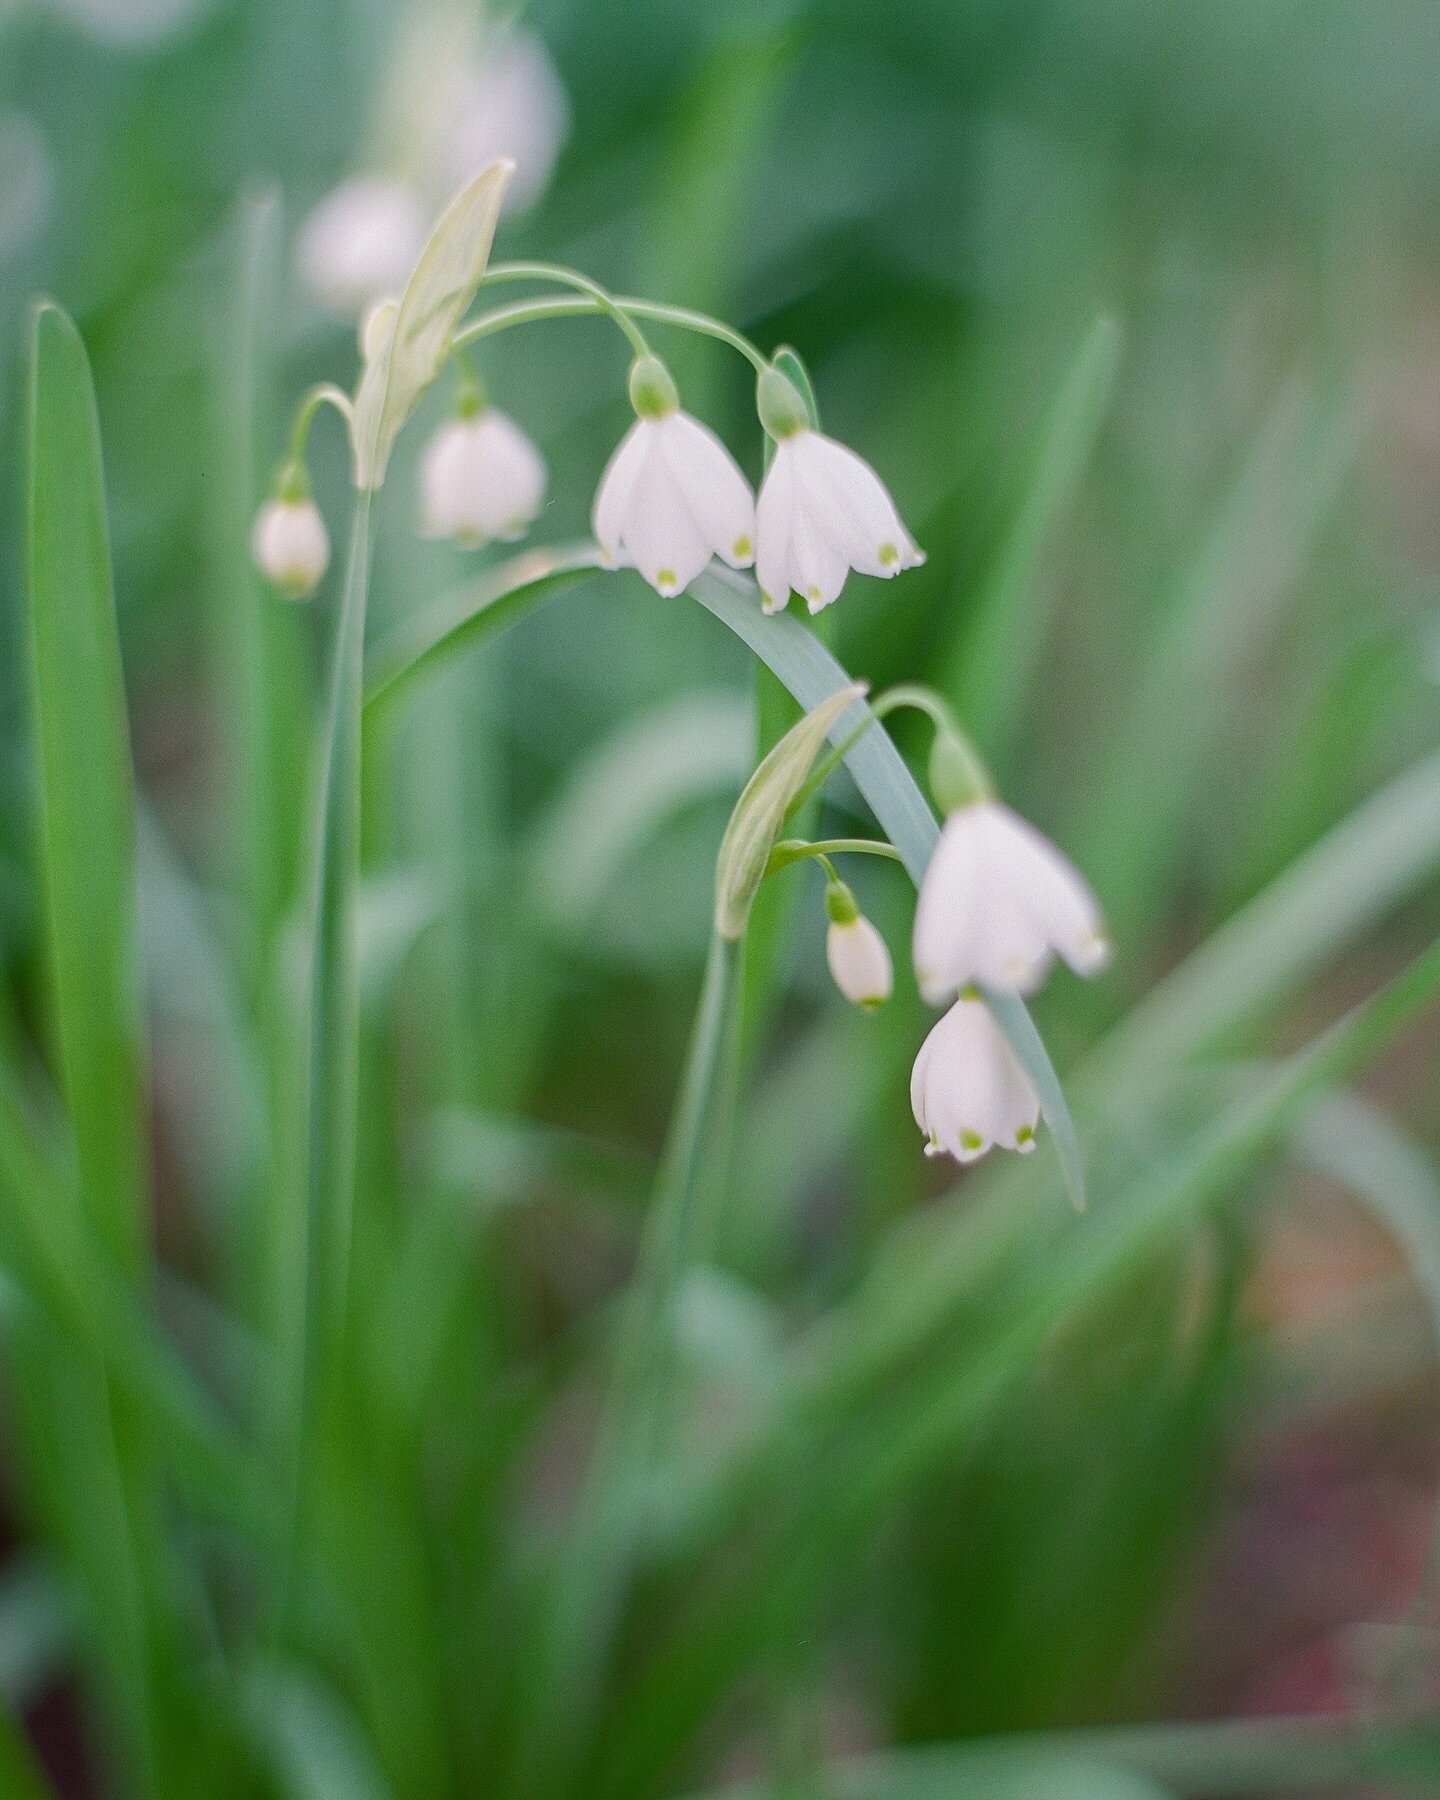 One of the daintiest of floral heralds, gives a soft yet discernible call that Spring is coming. 

We were lucky enough to have some snowdrops on our property before we moved in &amp; have since divided &amp; relocated them to more prominent position